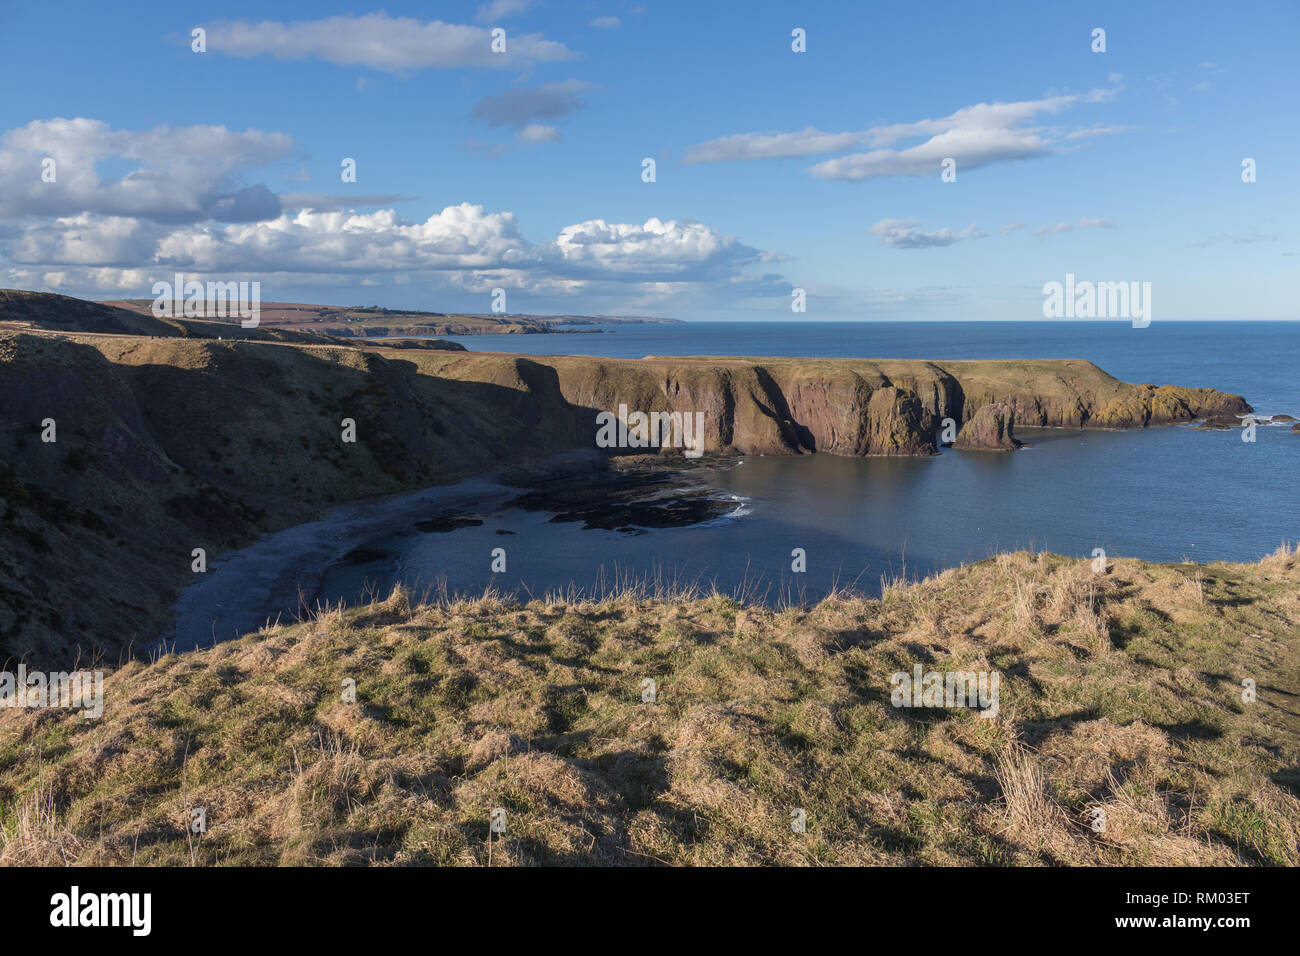 View North from the cliffs at Dunnottar castle, Stonehaven, Aberdeenshire, UK. Stock Photo